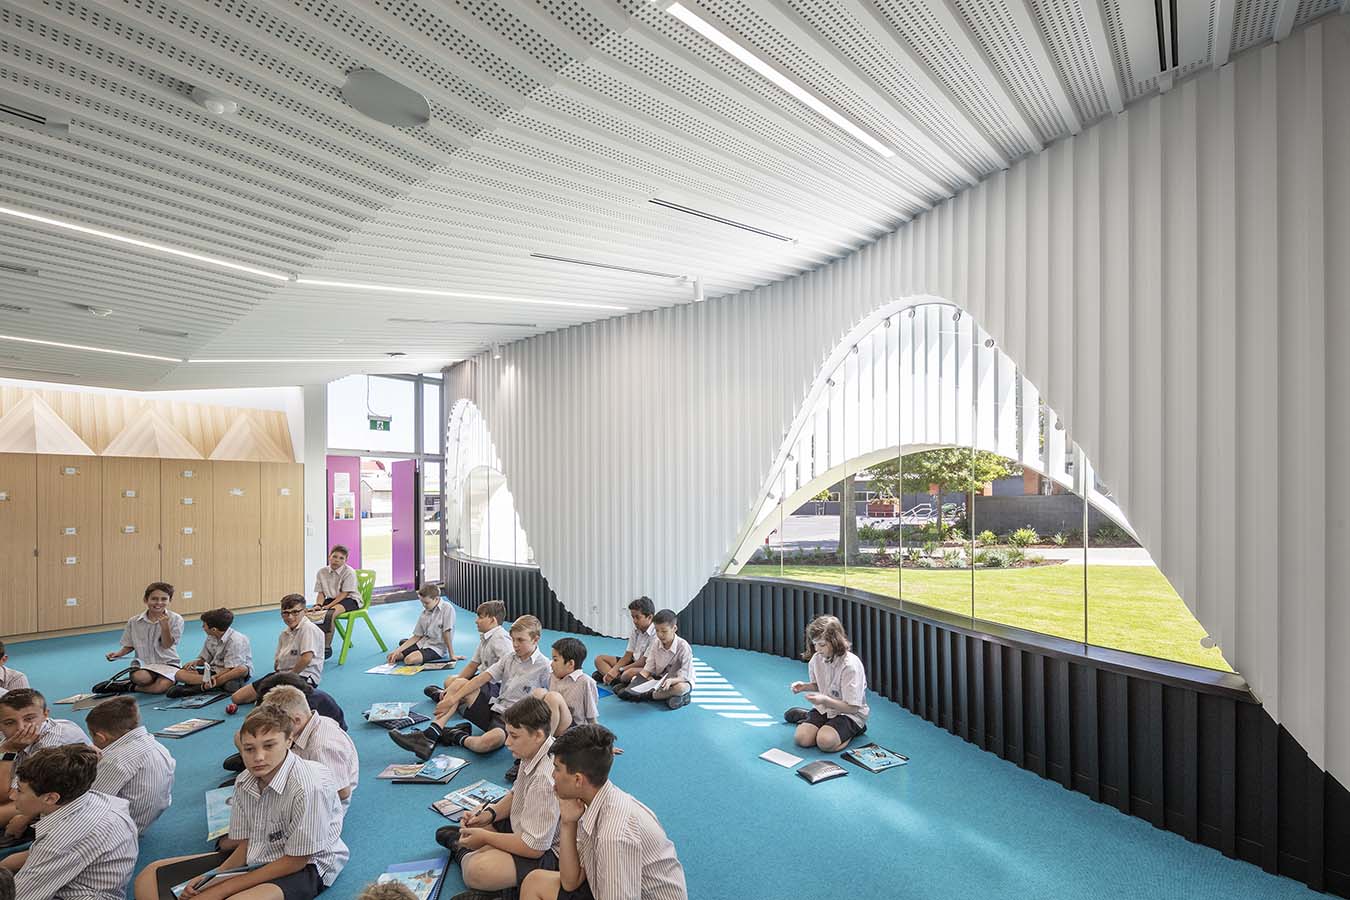 Students sitting on the vibrantly coloured, carpeted floor of one of the classrooms in the PEGS Music Centre. Photo by John Gollings